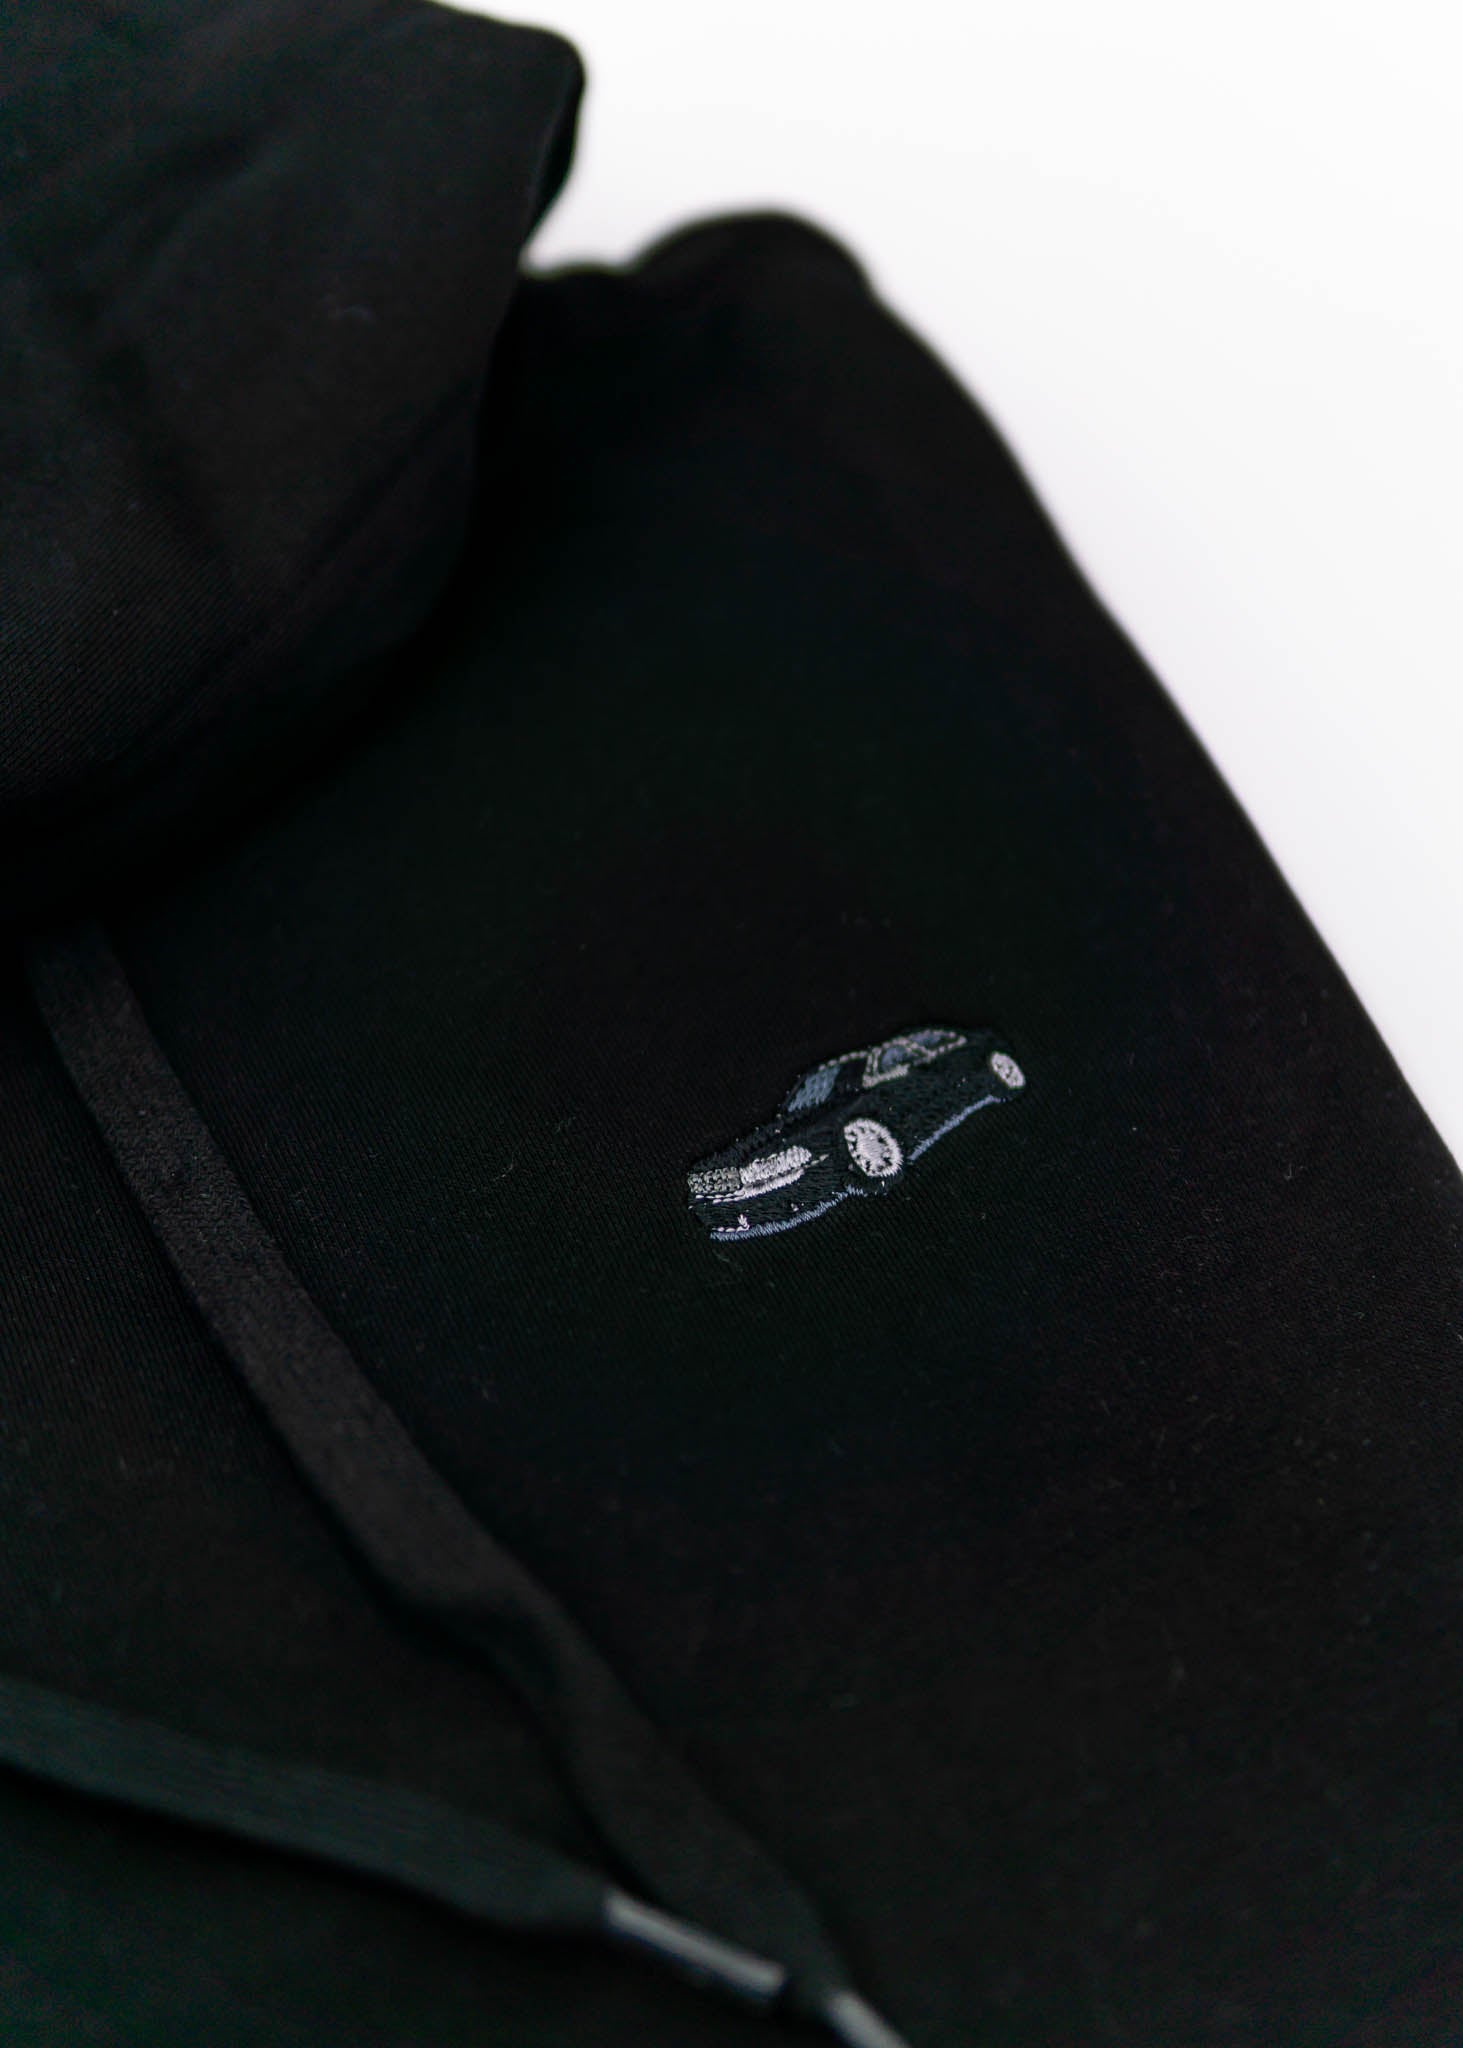 A black Audi hoodie for men and women. Photo is a close up view of the sweater with an embroidered Black Audi D2 S8. Fabric composition is cotton, polyester, and rayon. The material is very soft, stretchy, anti-shrink, and non-transparent. The style of this hoodie is long sleeve, crewneck with a hood, hooded, with embroidery on the left chest.